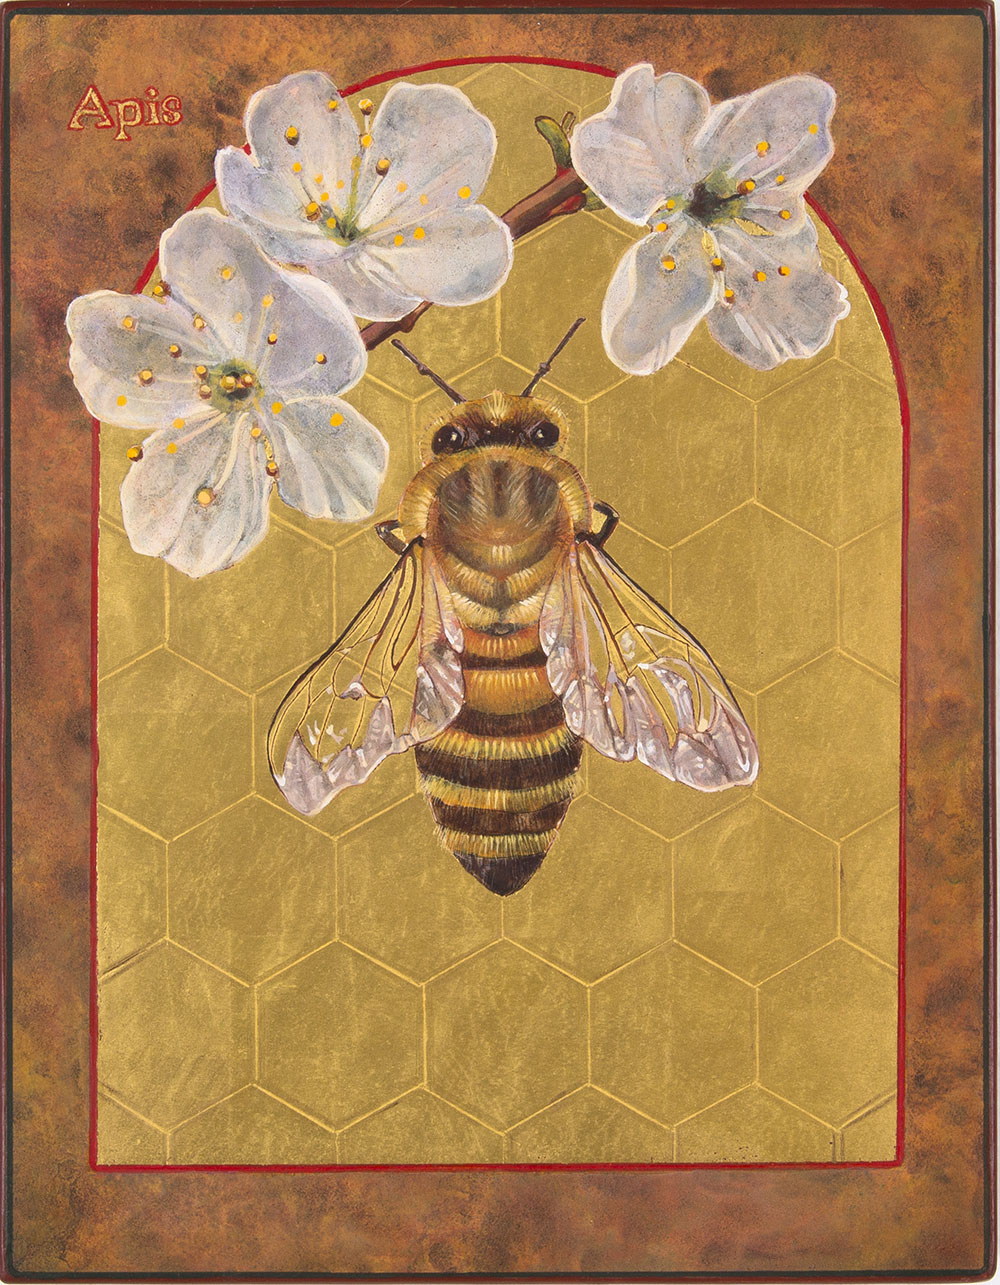 Angela Manno, Apis, The Honey Bee. Egg Tempera and Gold Leaf on Wood. 9” x 7” x 1.” ©2016 Angela Manno. Courtesy of the artist.